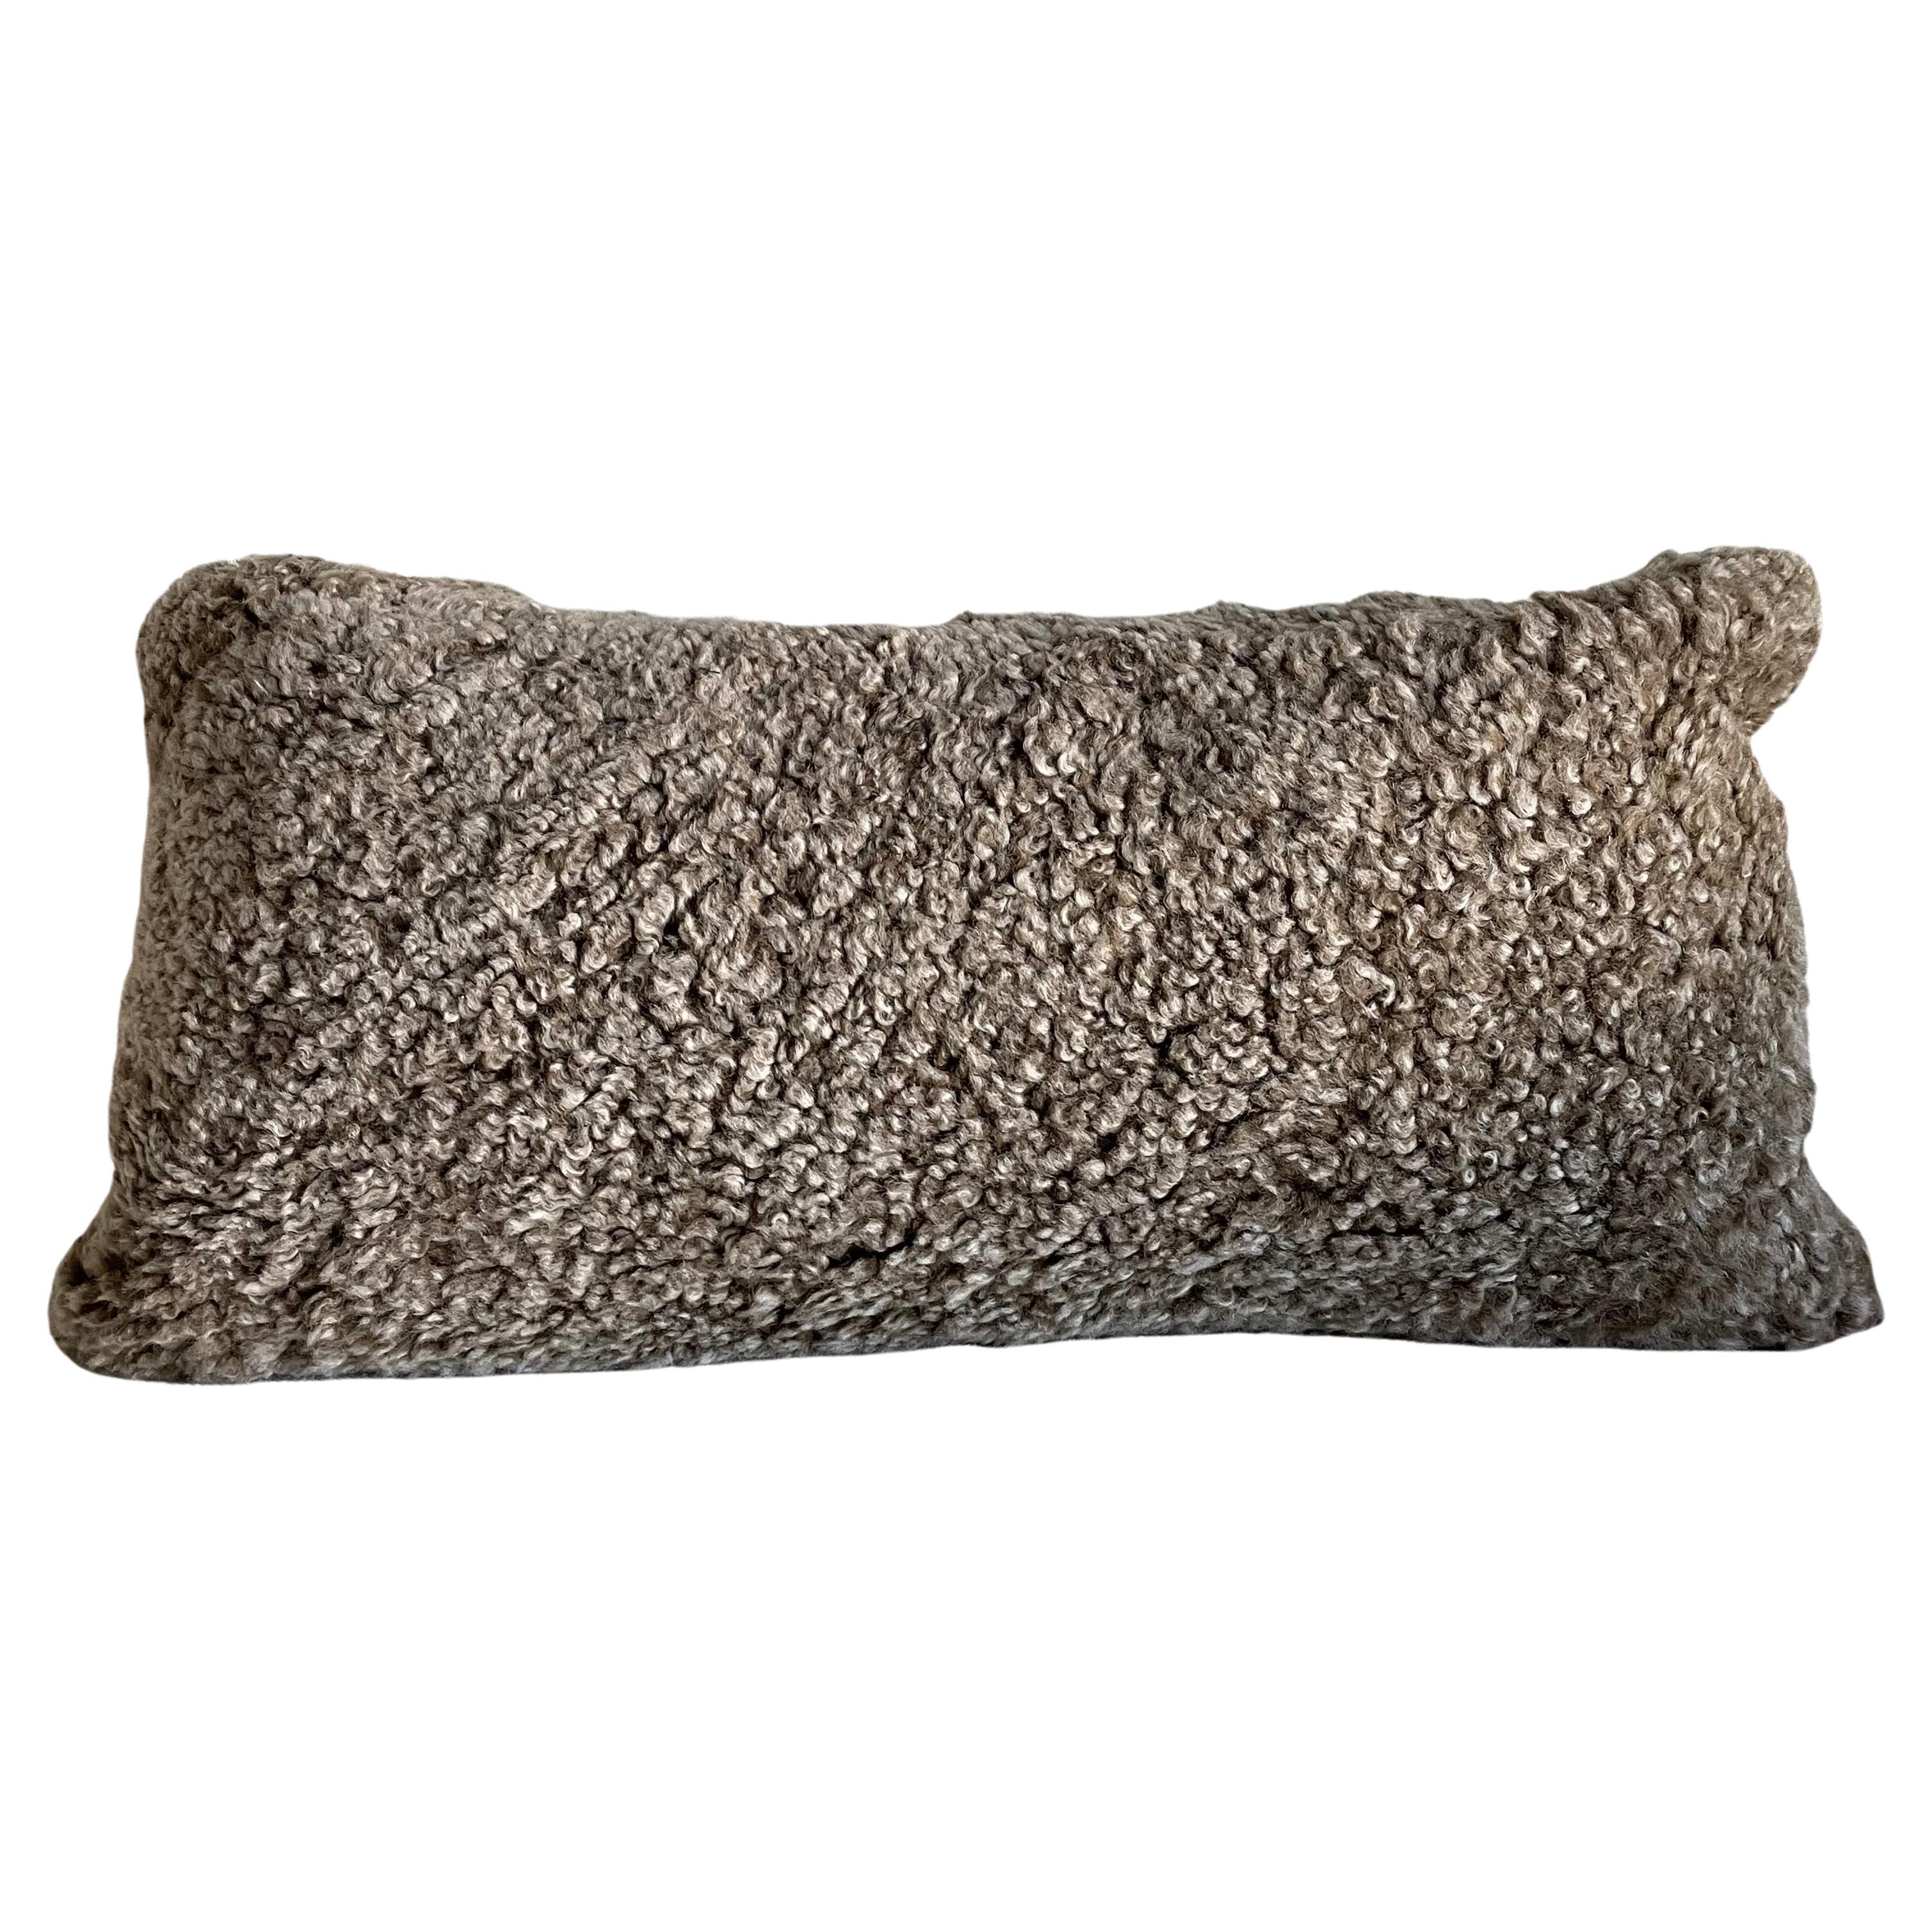 Custom Curly Shearling Lumbar Pillow in Mink Color For Sale